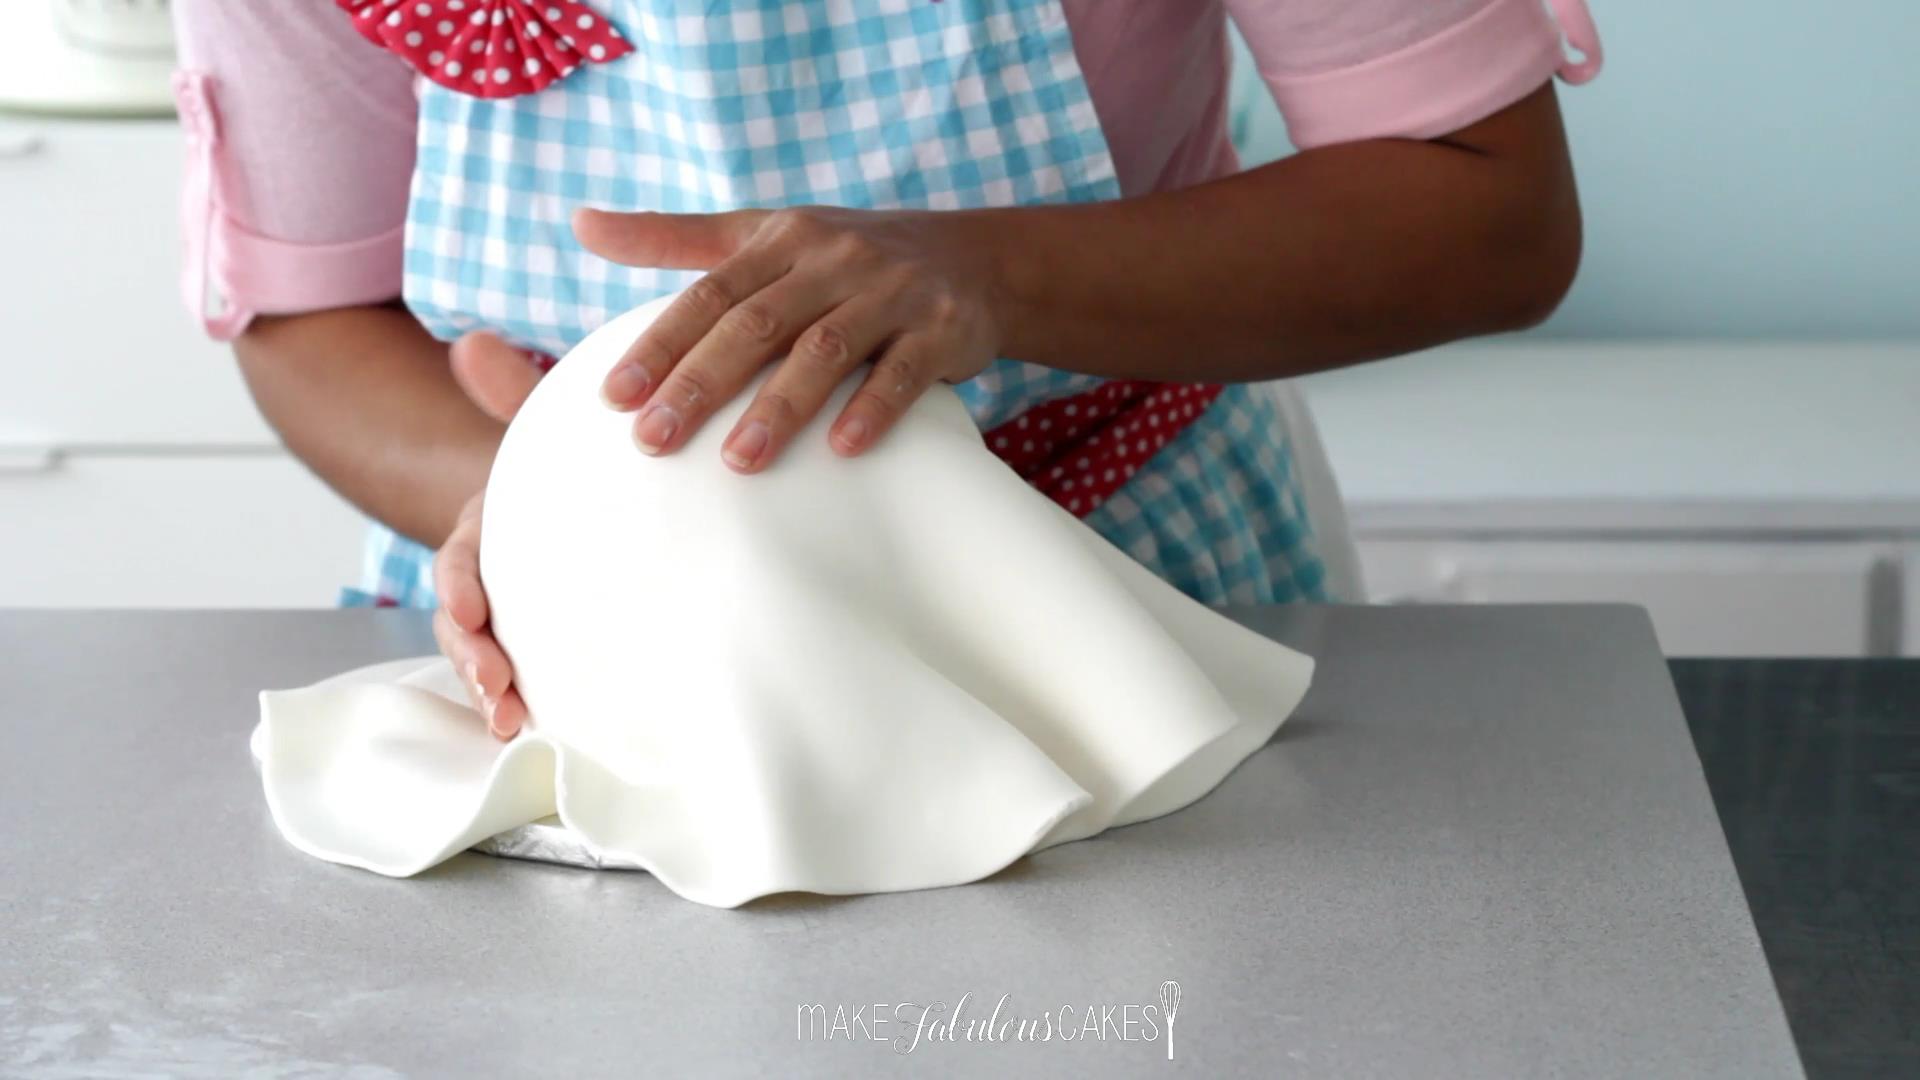 smoothing the fondant on the ball cake with hands